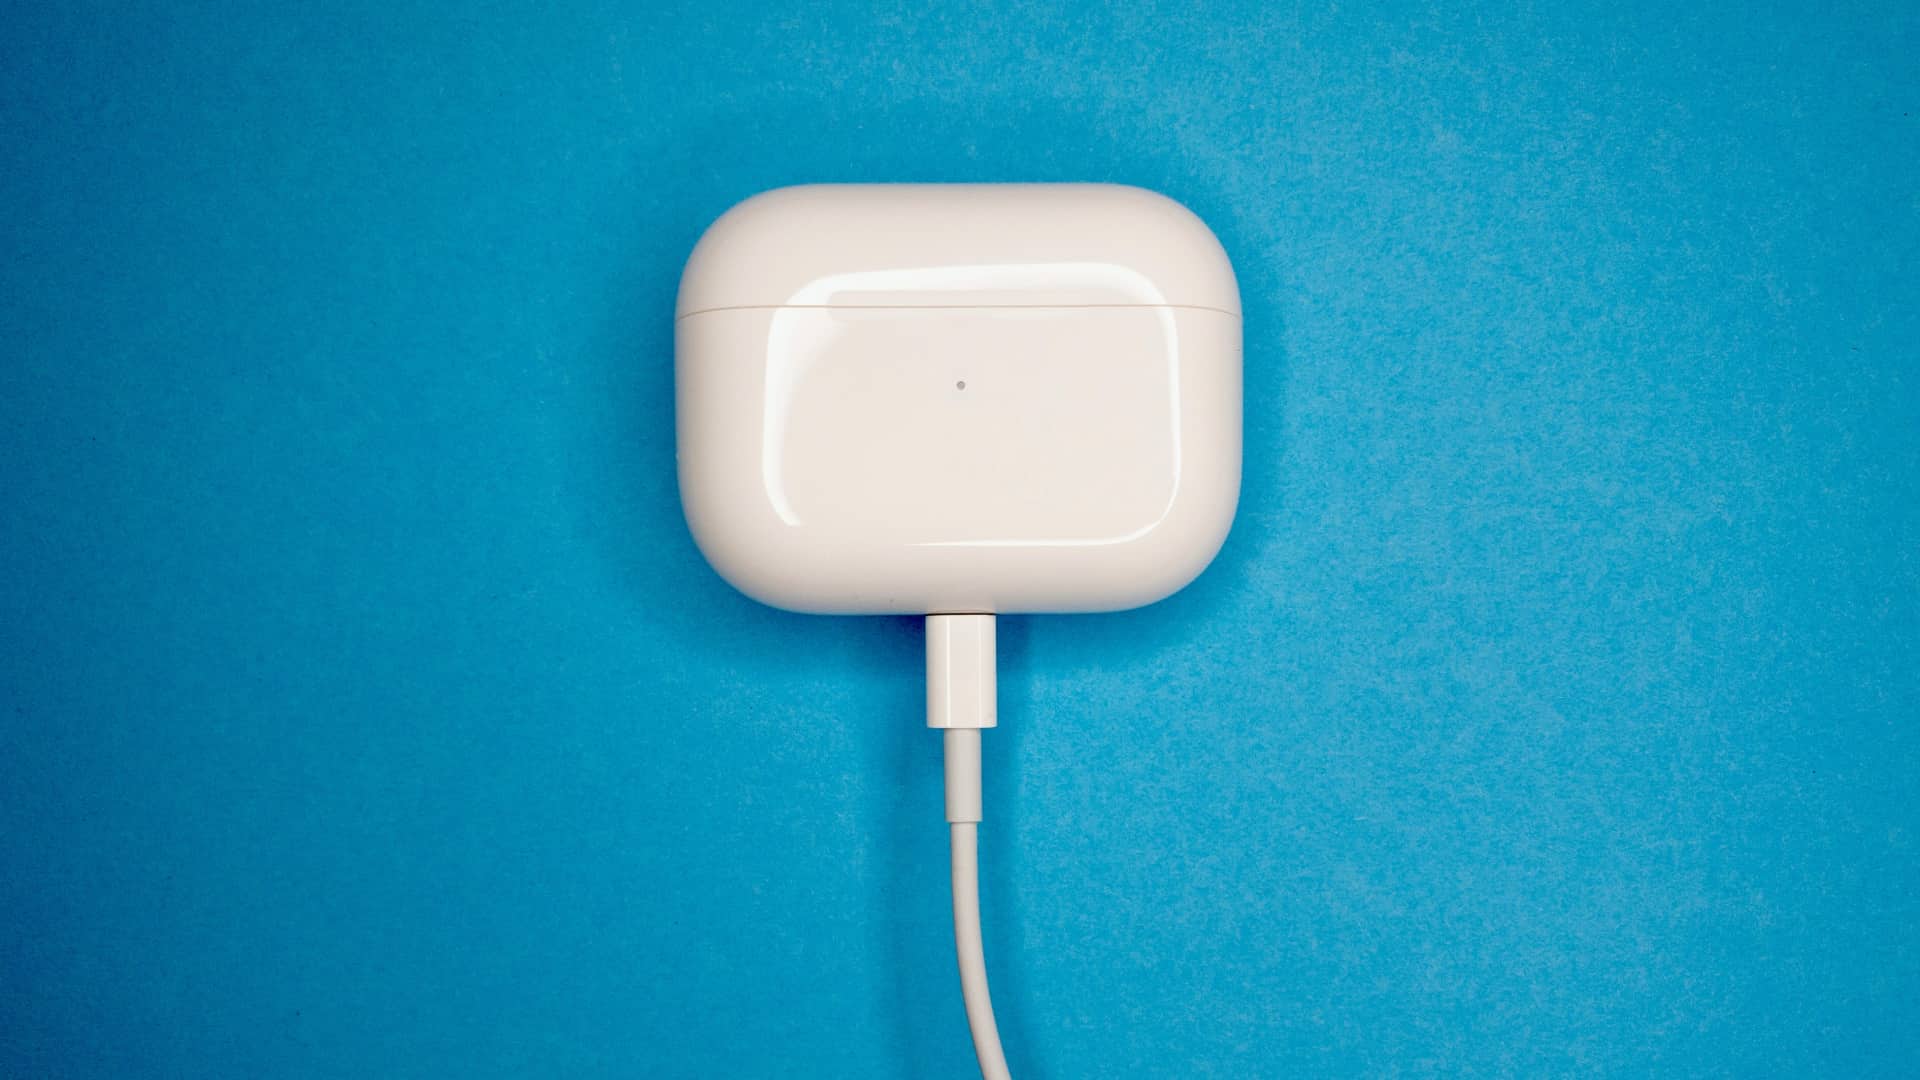 AirPods Pro in their case, charging with a Lightning to USB cable, set against a blue textured background